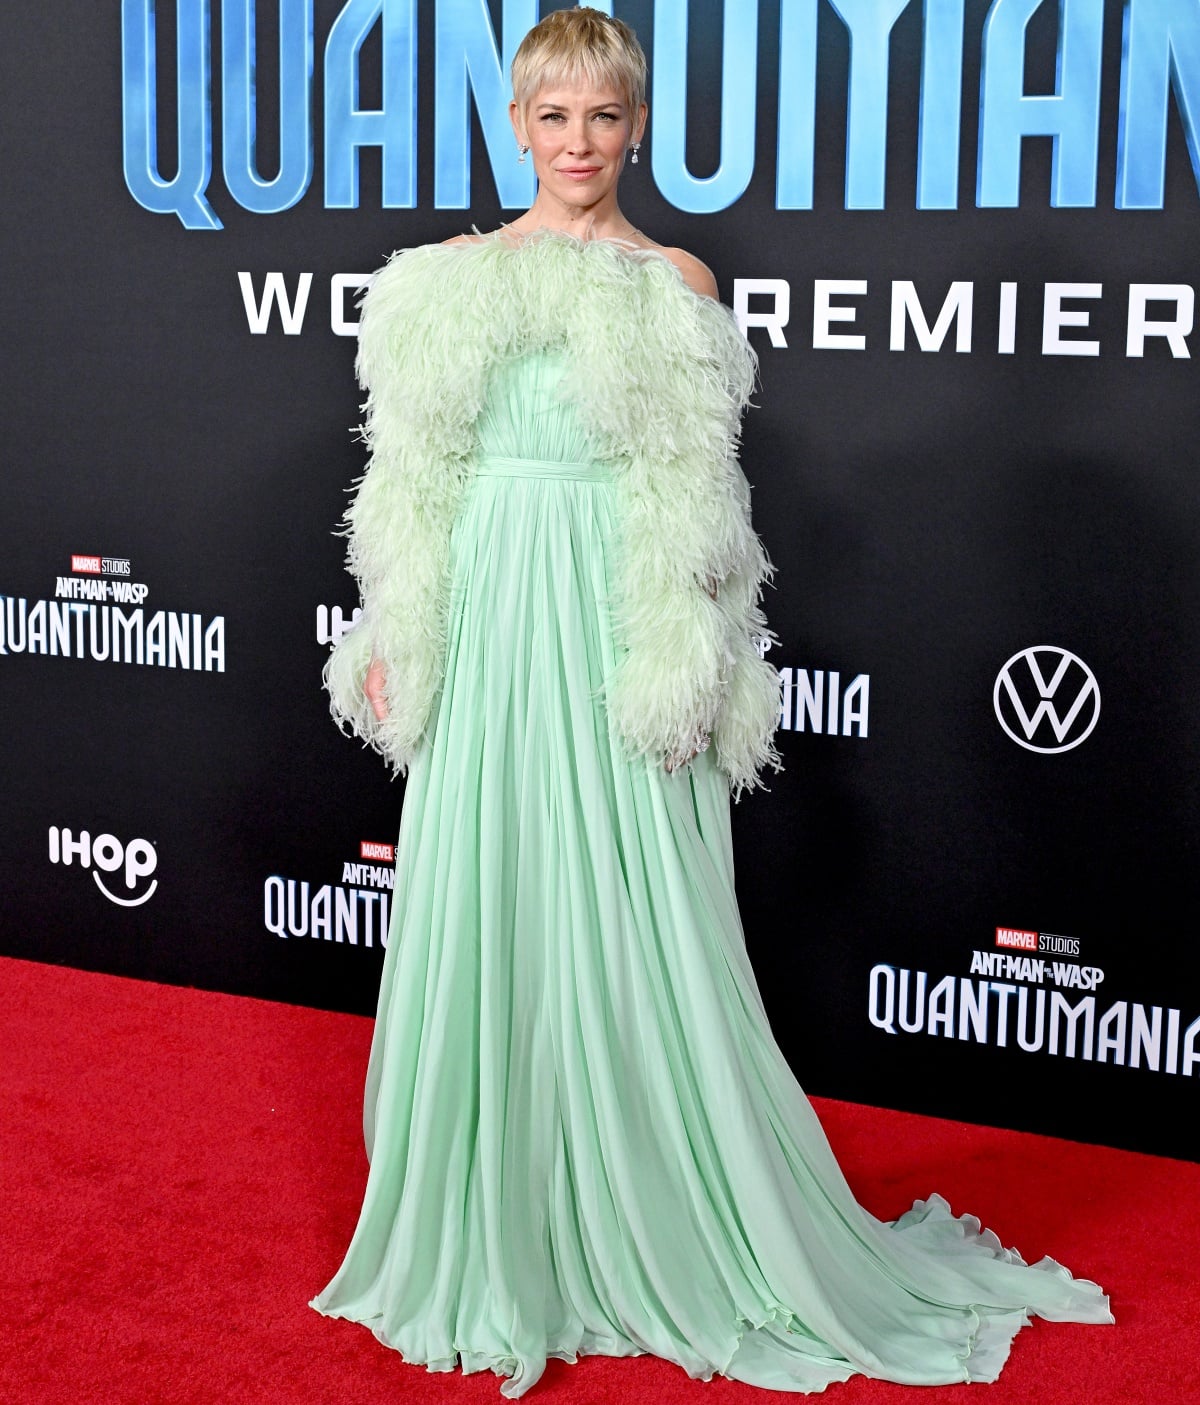 Evangeline Lilly turning heads in a Giambattista Valli Haute Couture gown at the premiere of Ant-Man and the Wasp: Quantumania